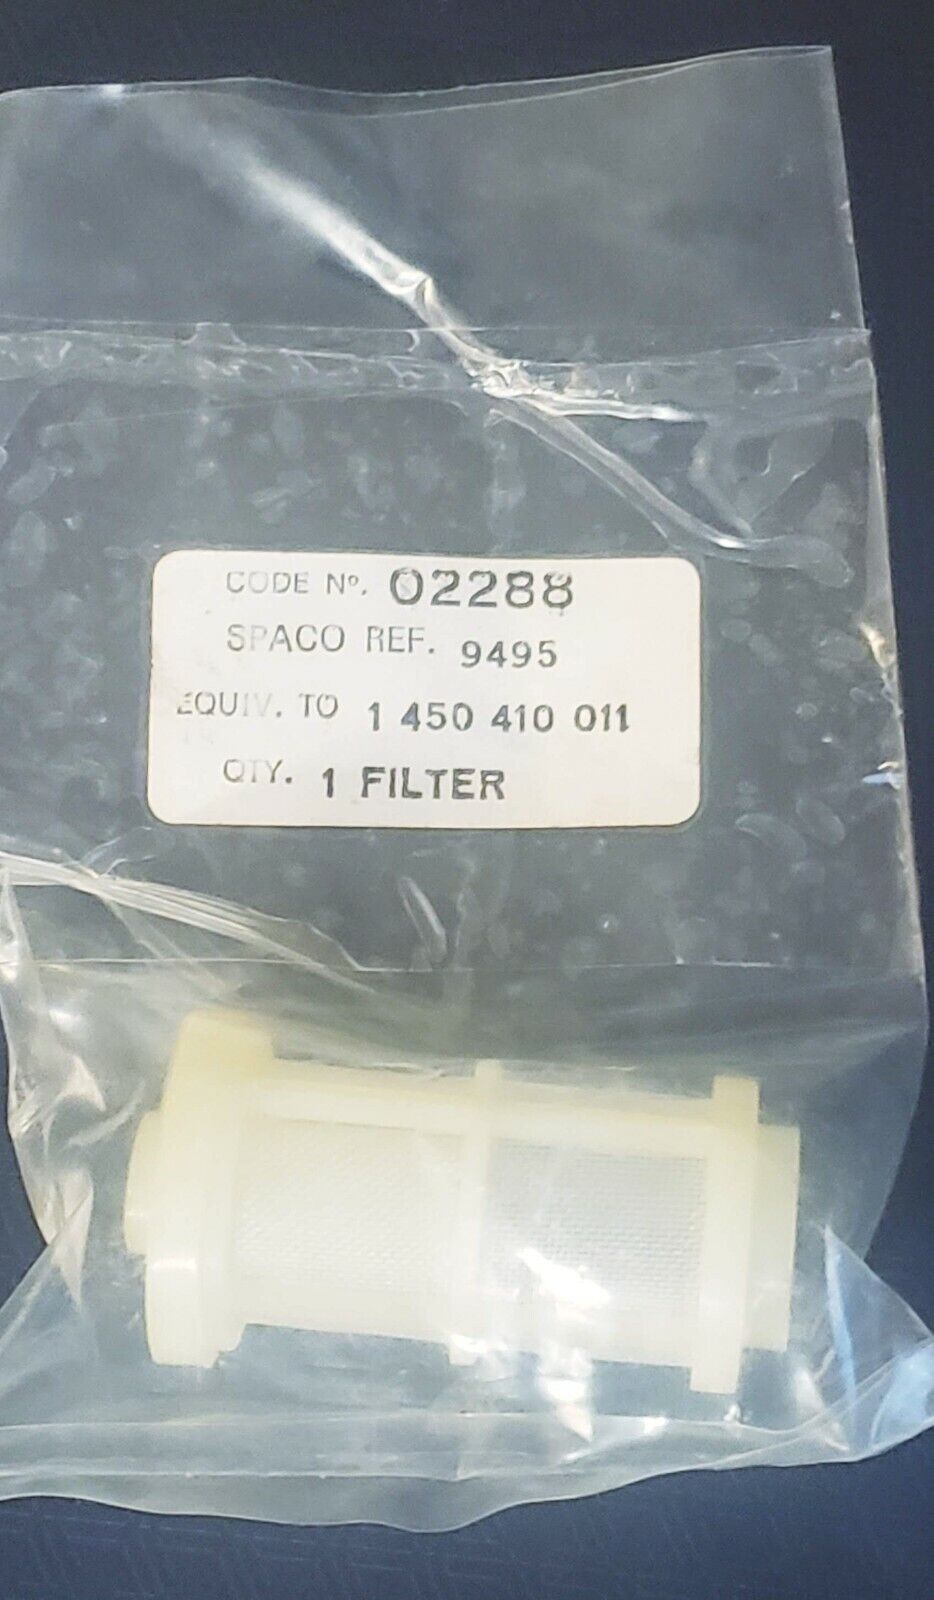 BOSCH FILTER 1450410011 for INJECTION SUPPLY PUMPS. Mercedes, Fiat, KHD, Ect.